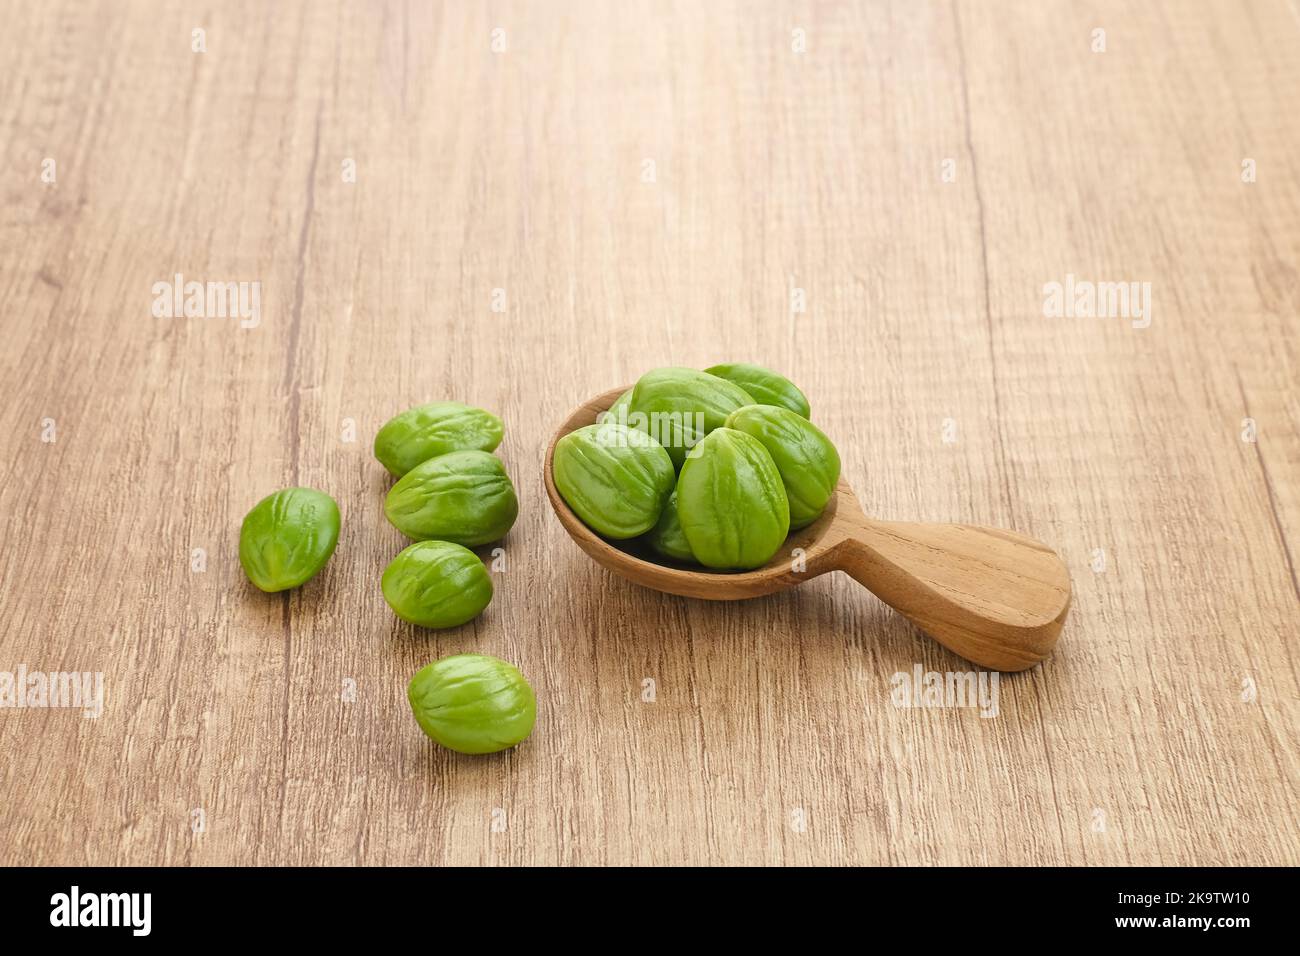 Pete or Petai beans, usually eaten raw or for other cooking ingredients. Popularly known as stink bean. Stock Photo